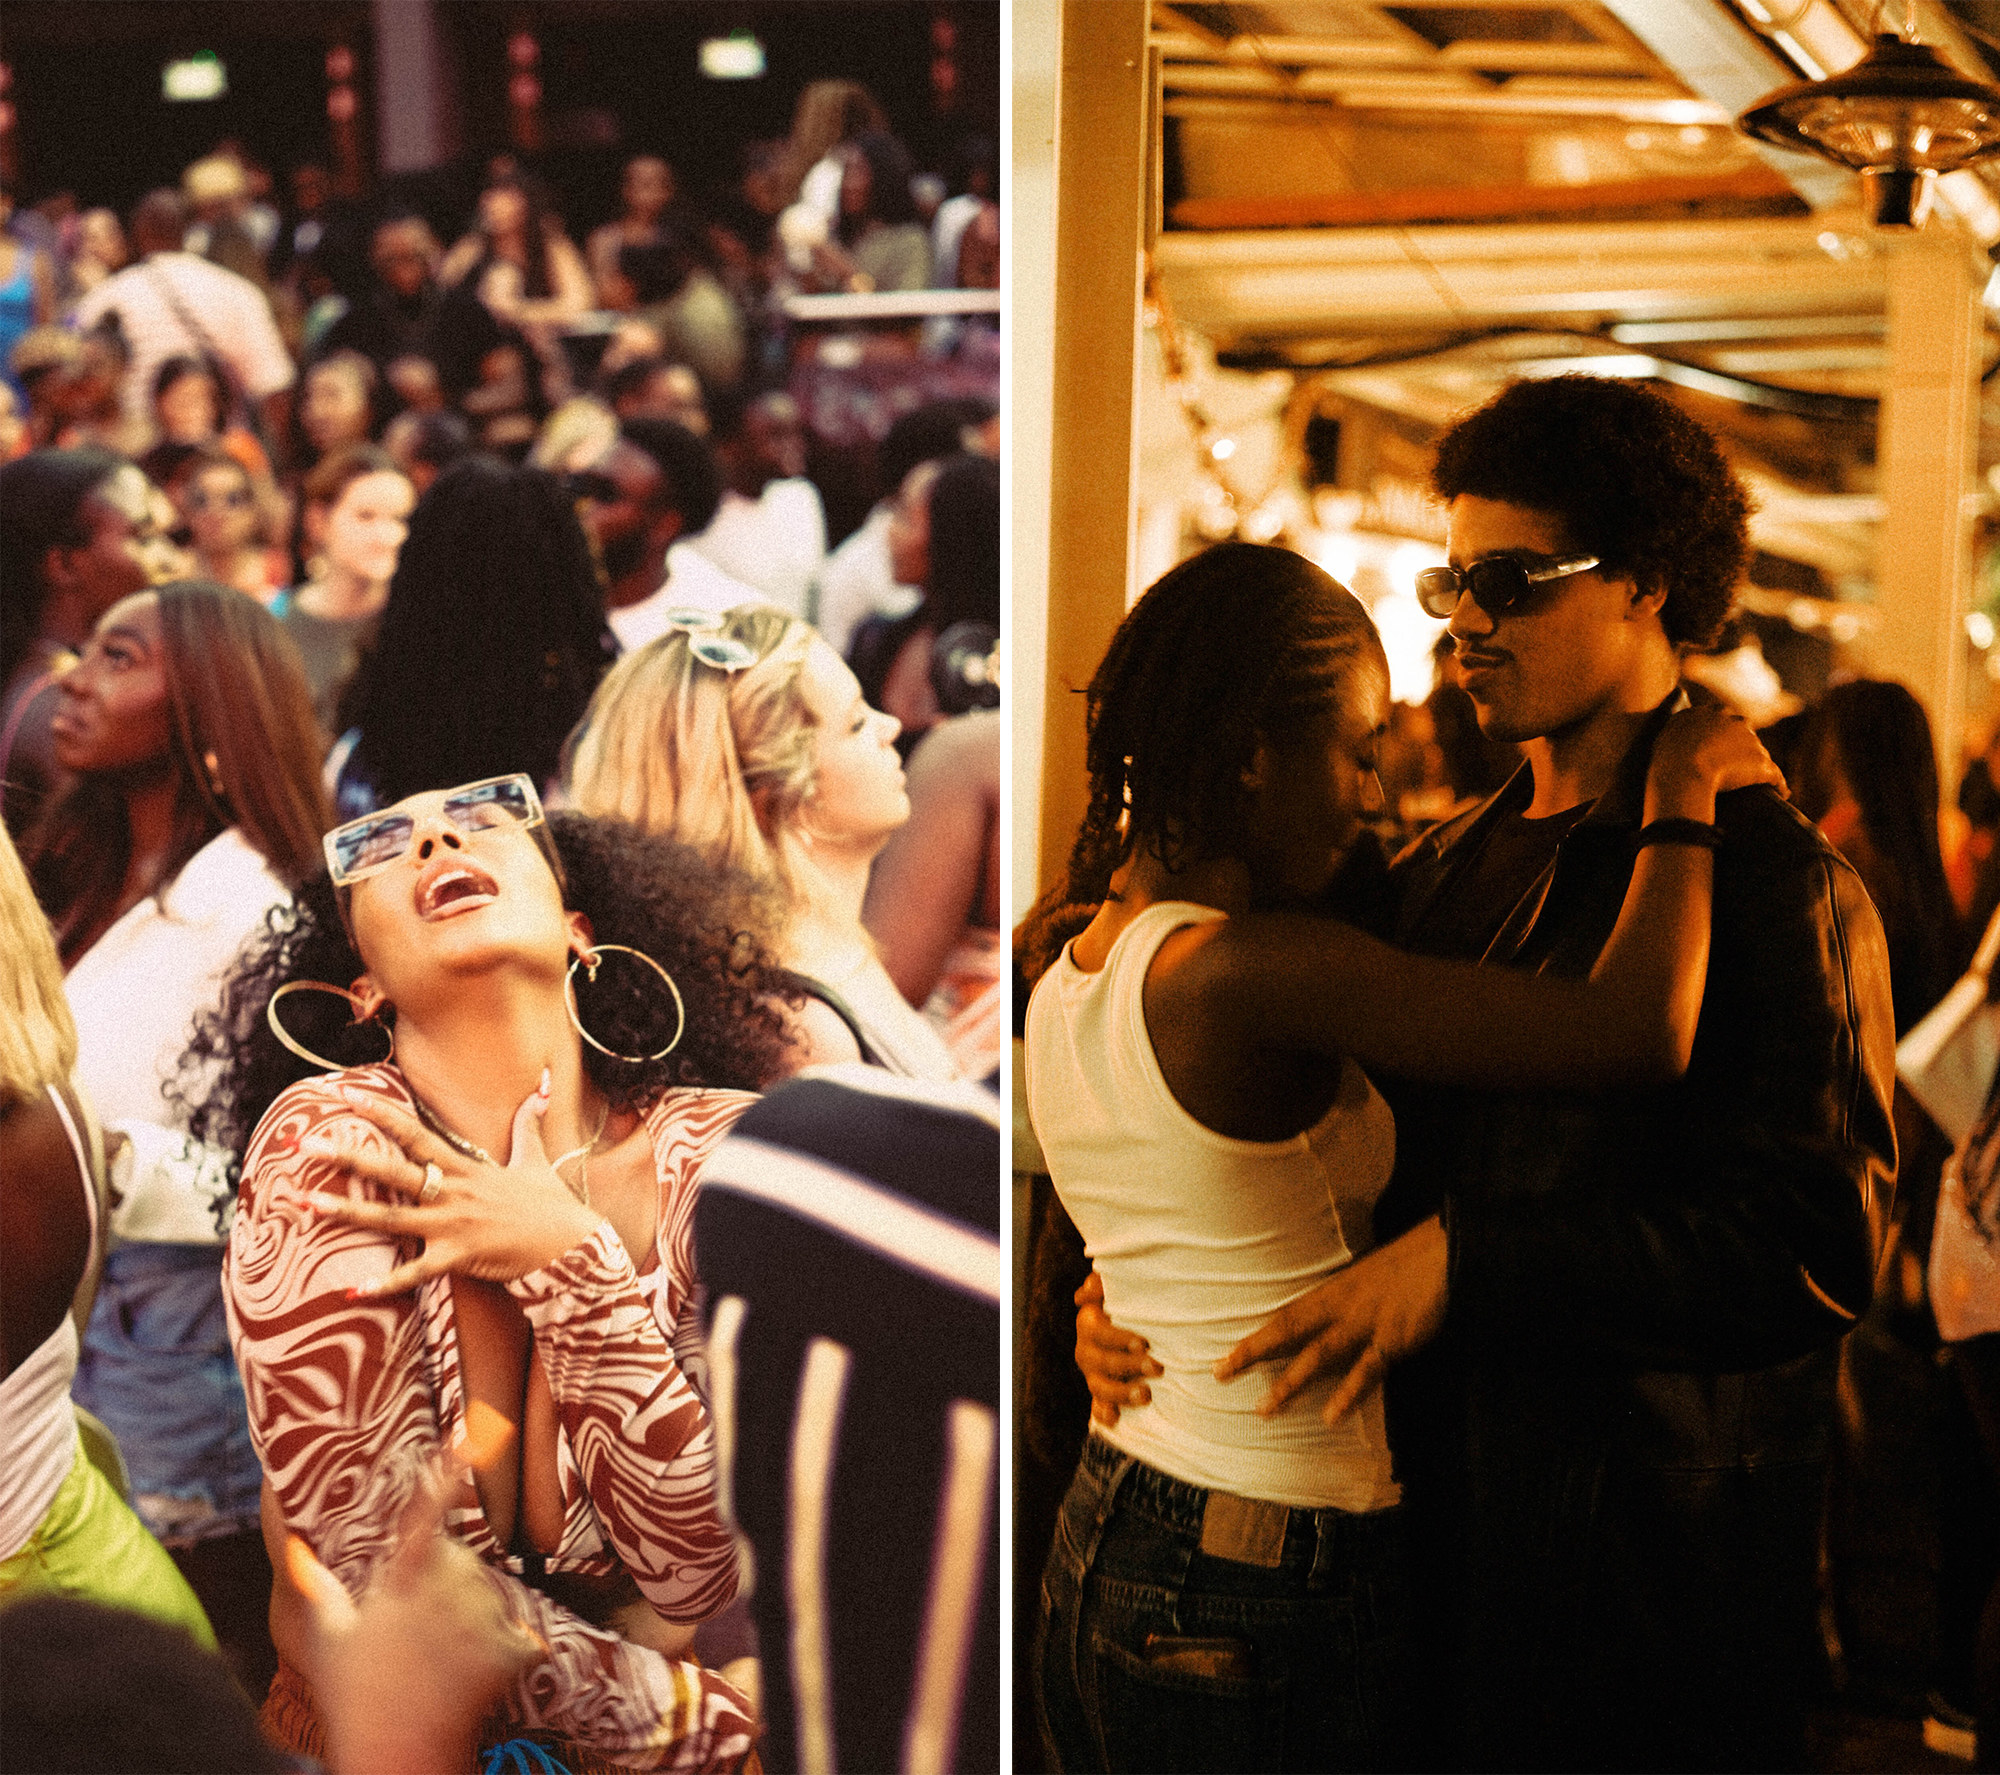 Left: An image of a Black woman dancing in a club, while making a dramatic expression. Right: A Black male/female couple slow dances in a club.